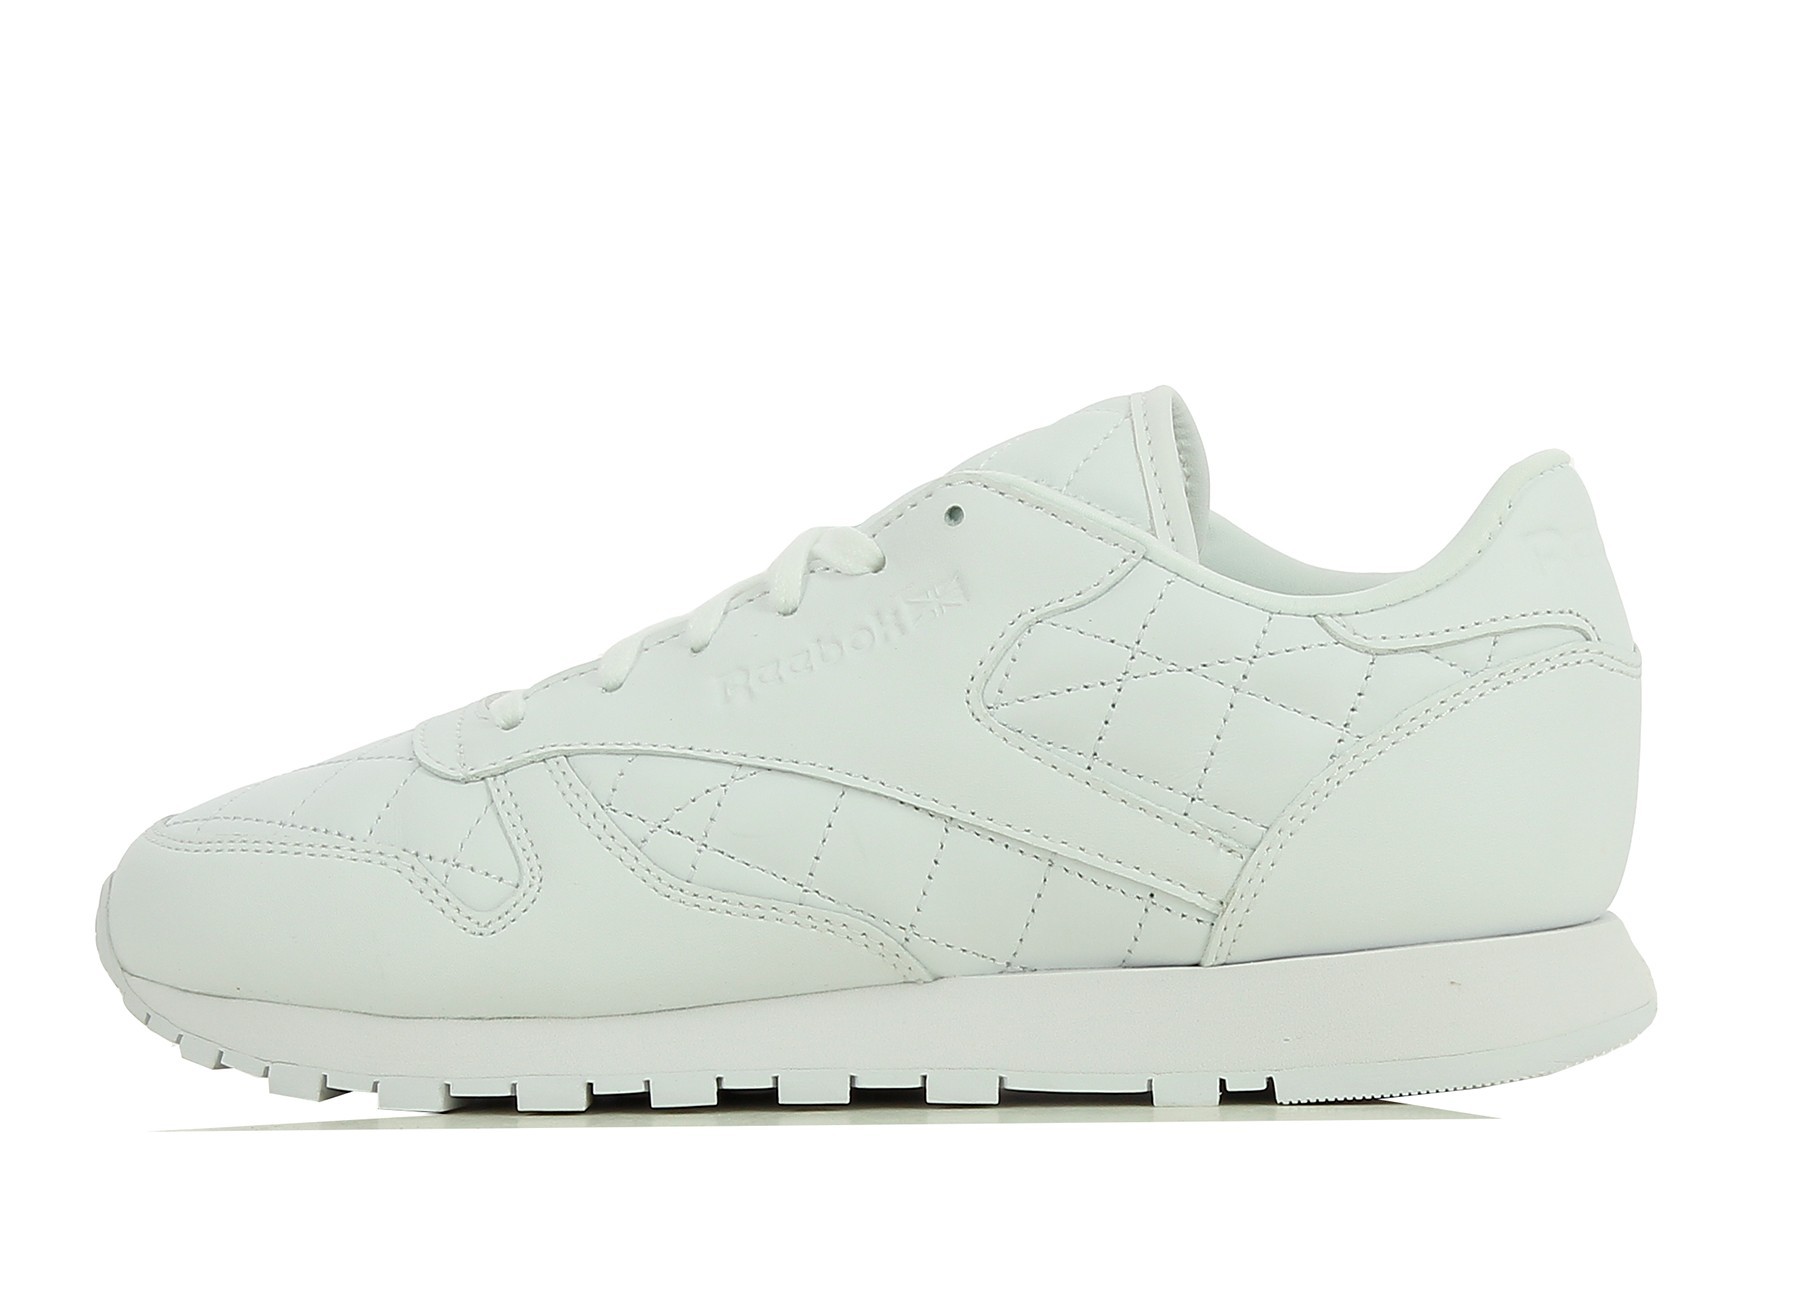 Reebok Classic Leather Quilted ar1262 Sneaker Femmes Chaussures De Sport Cuir Blanc 